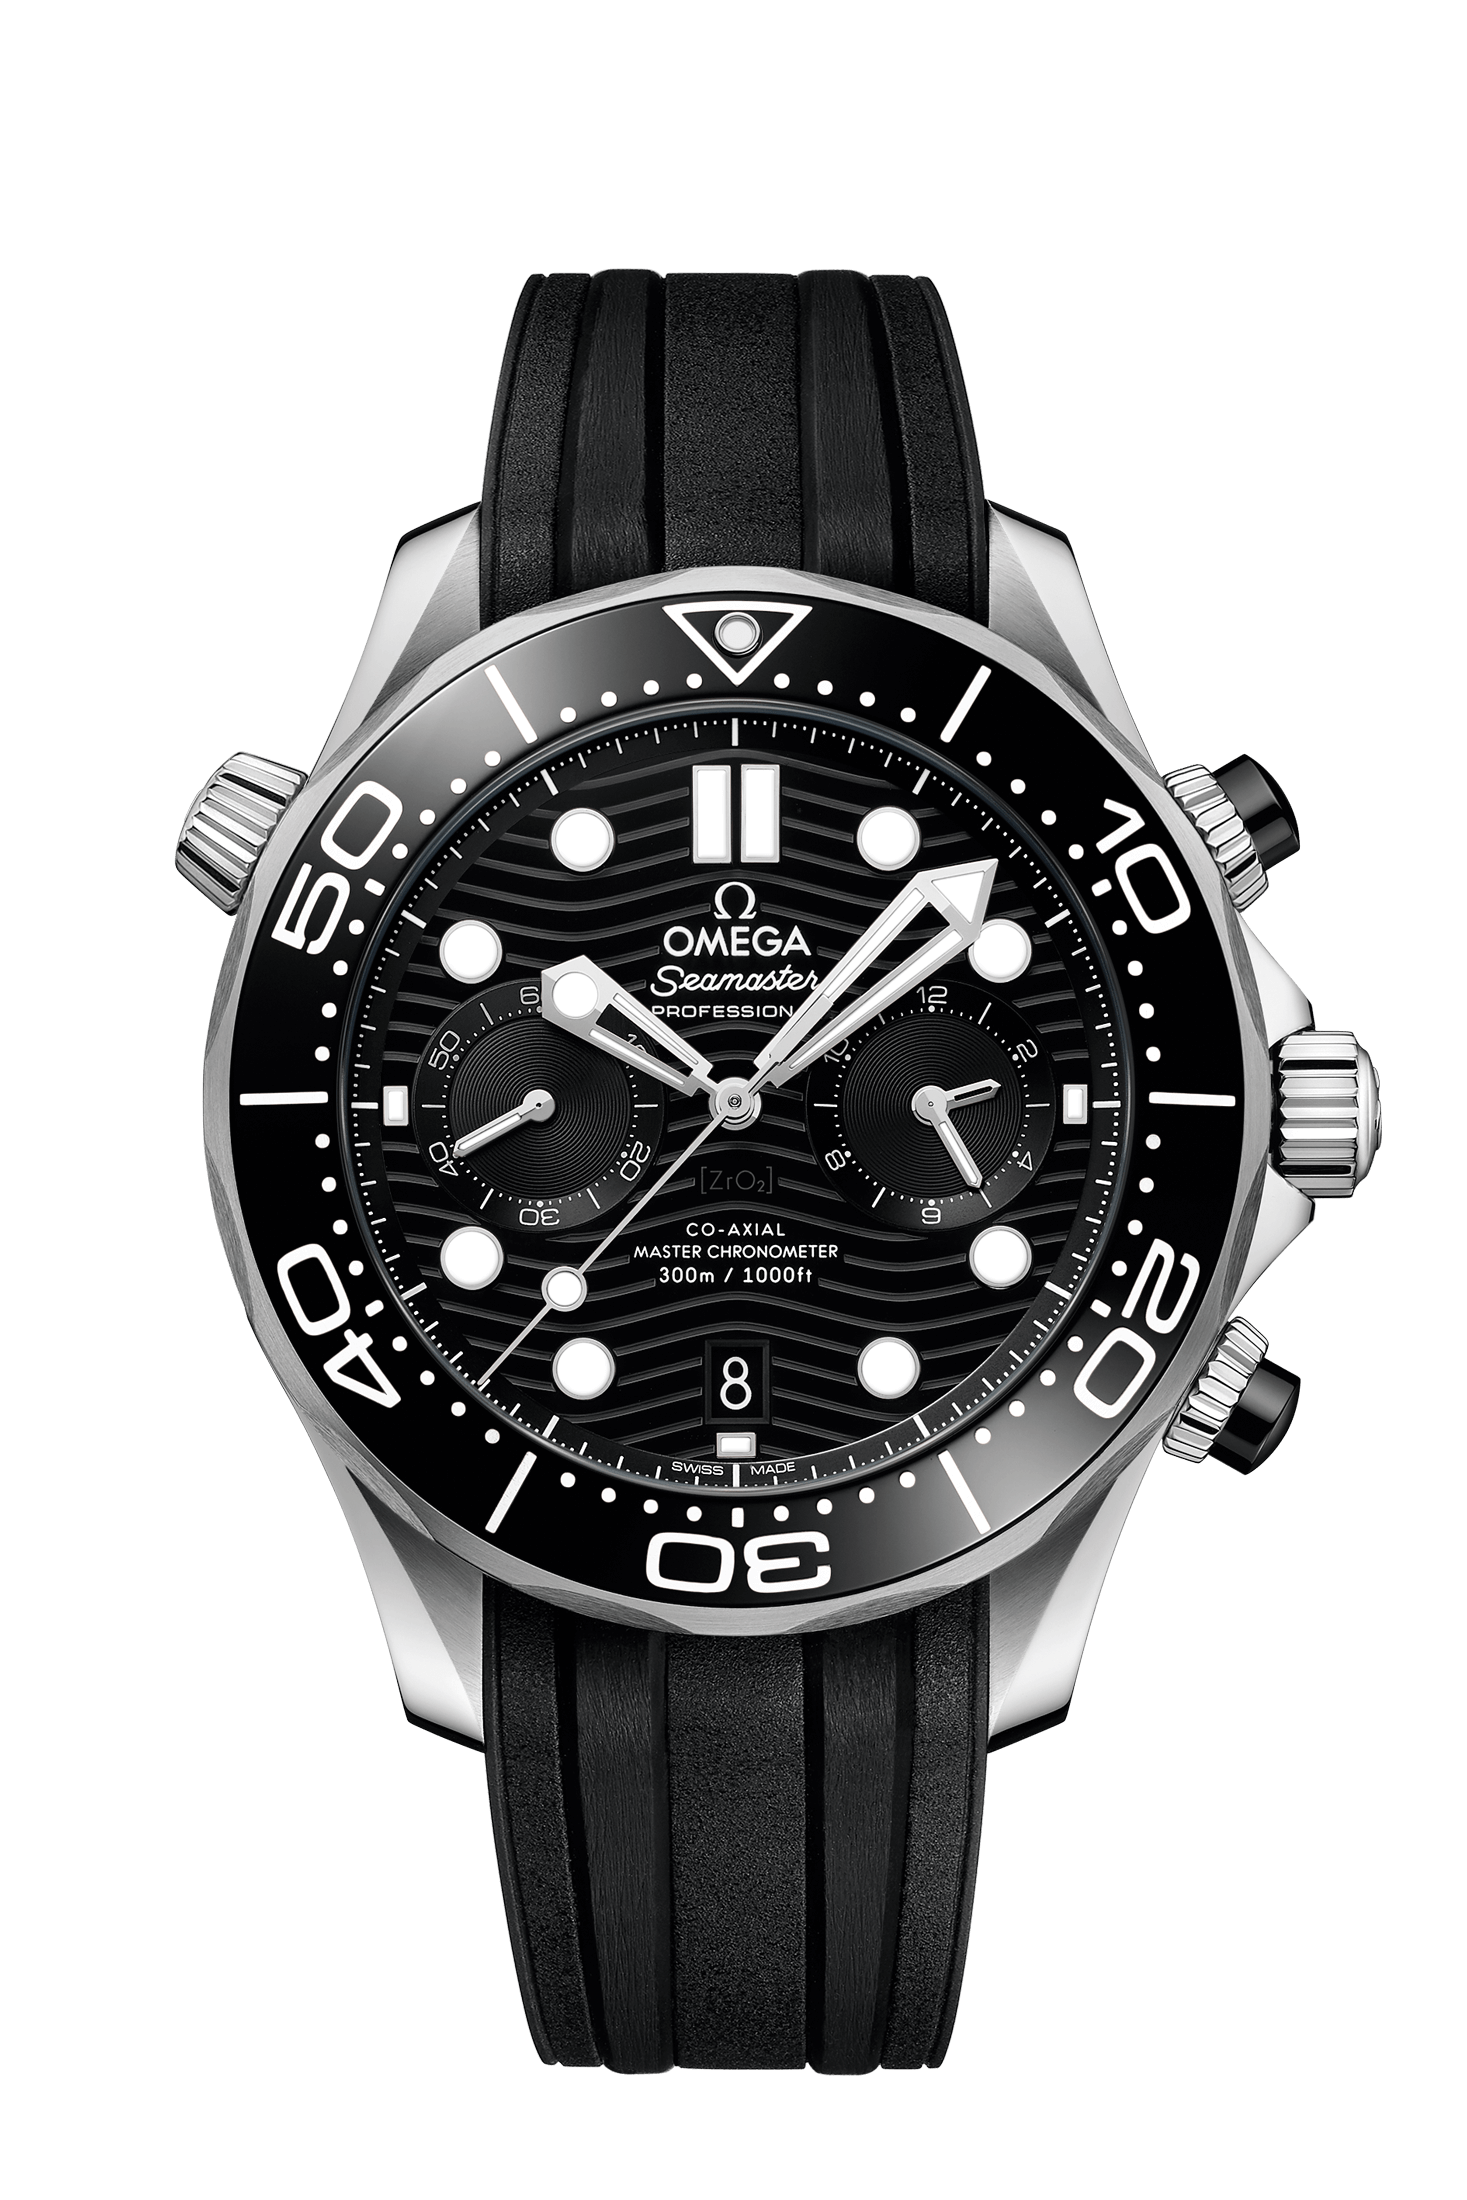 Men's watch / unisex  OMEGA, Diver 300m Co Axial Master Chronometer Chronograph / 44mm, SKU: 210.32.44.51.01.001 | watchapproach.com